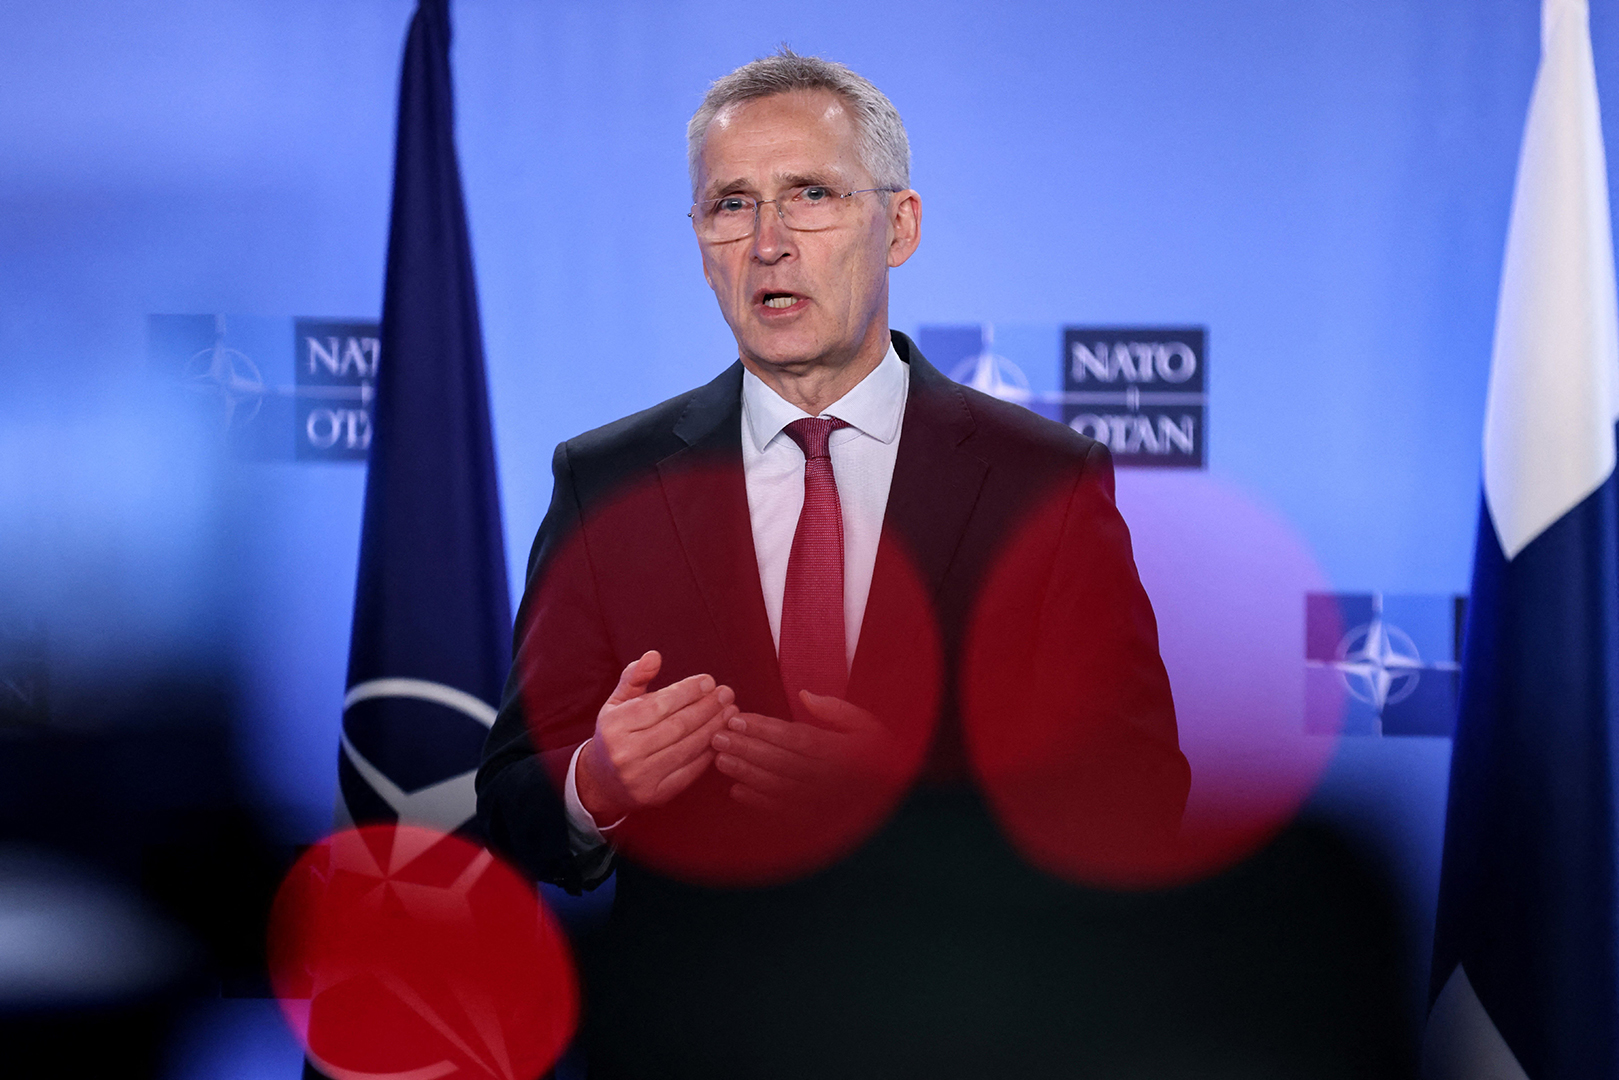 NATO Secretary General Jens Stoltenberg speaks during a joint press conference with to Finland's Foreign and Defense Ministers at the NATO headquarters in Brussels on March 20.